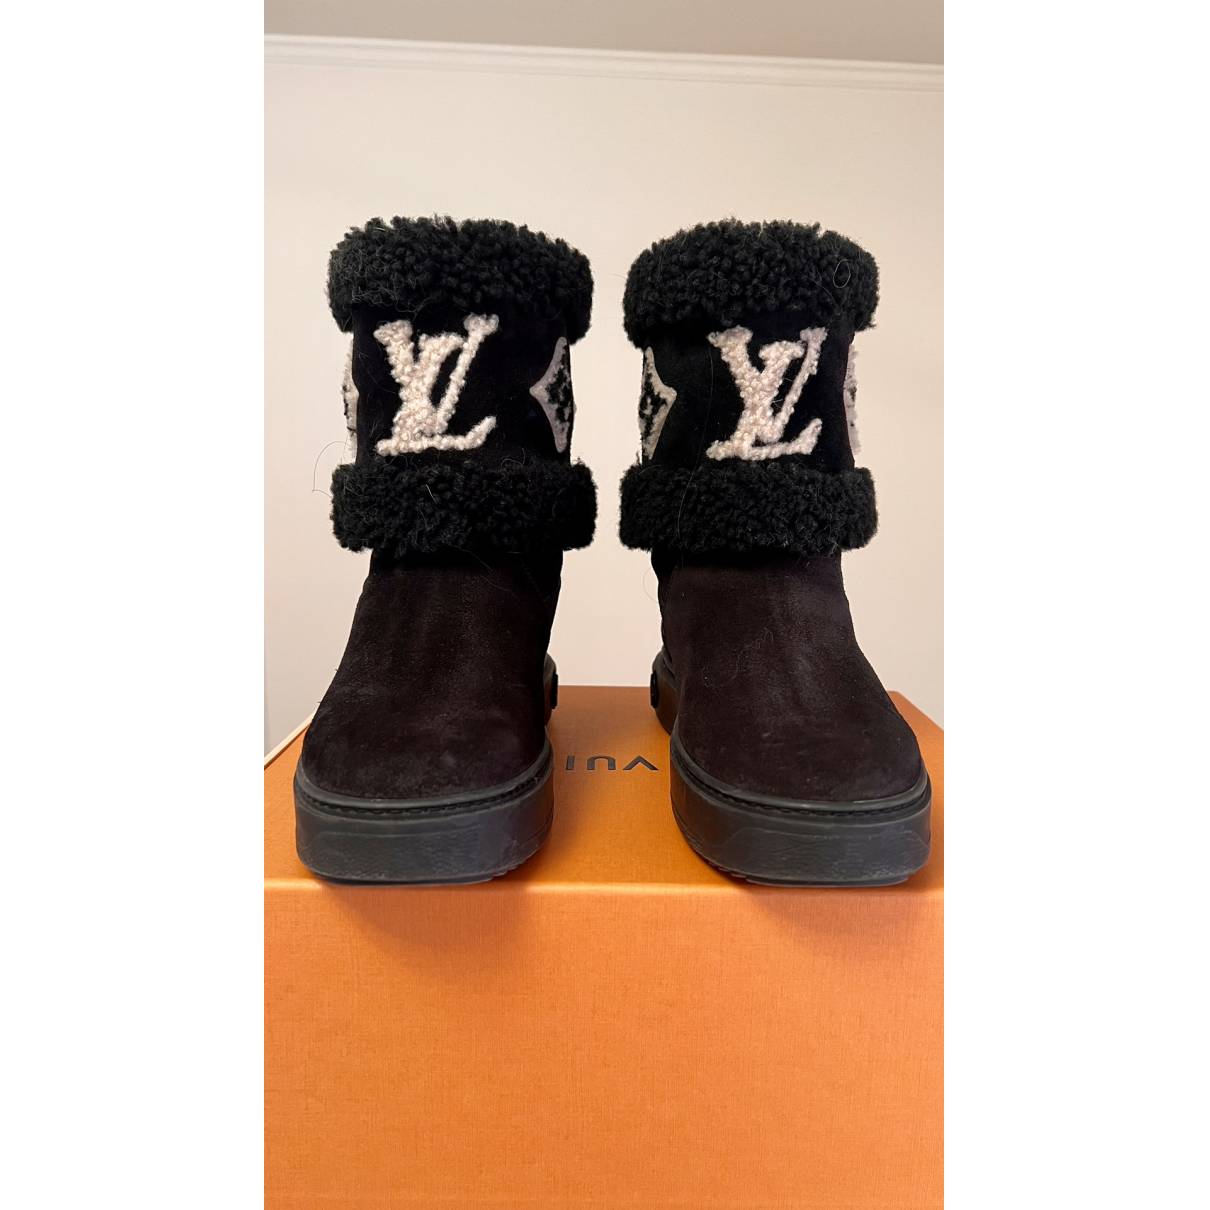 LOUIS VUITTON PARIS Snowdrop Shearling Boots BLACK SUEDE AND FUR LINED EURO  37 M